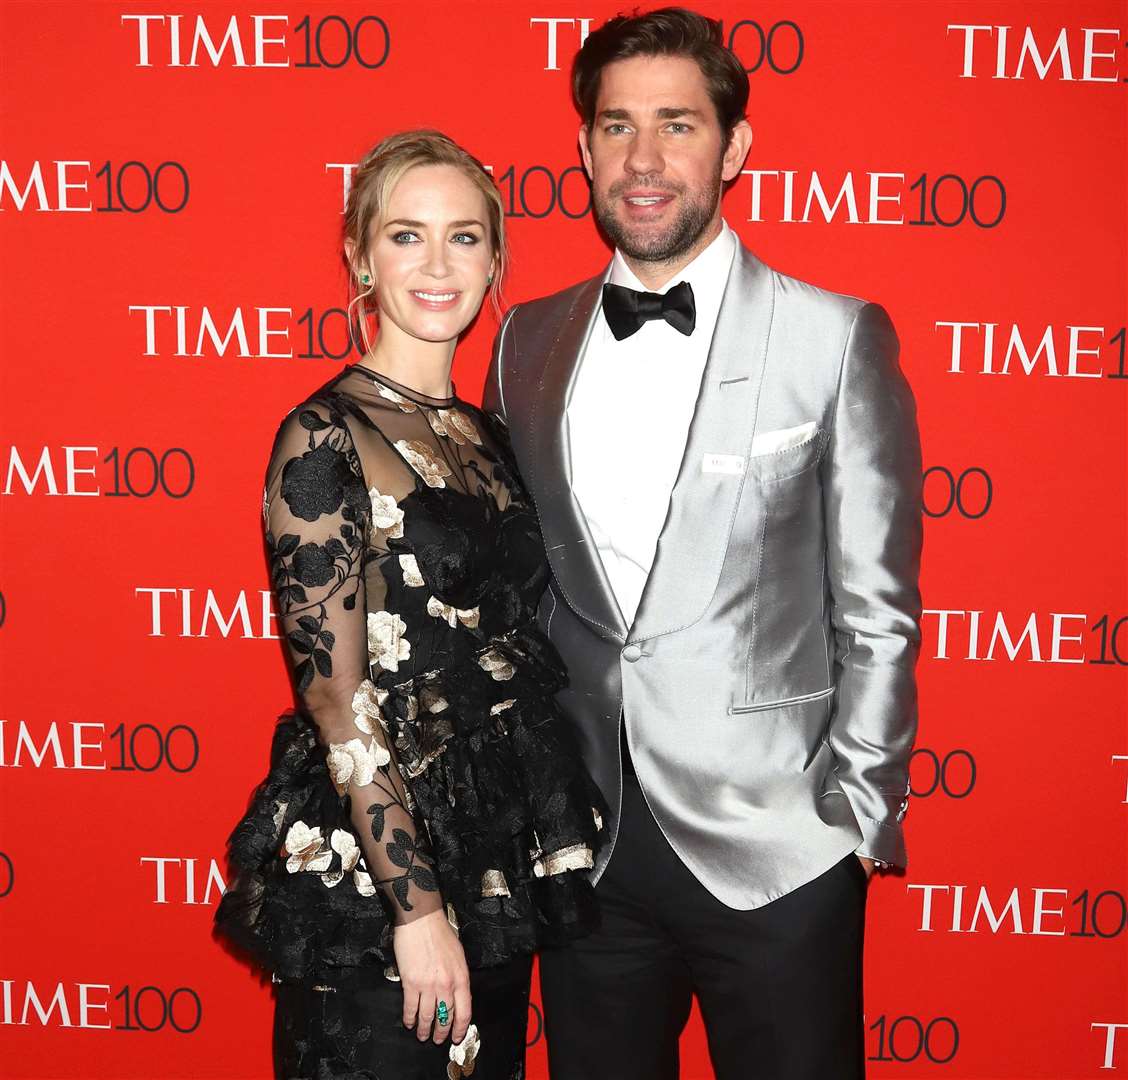 Emily Blunt and John Krasinski attend the 2018 Time 100 Gala at Jazz at Lincoln Center in New York. Picture: PBG/PA Archive/PA Photos